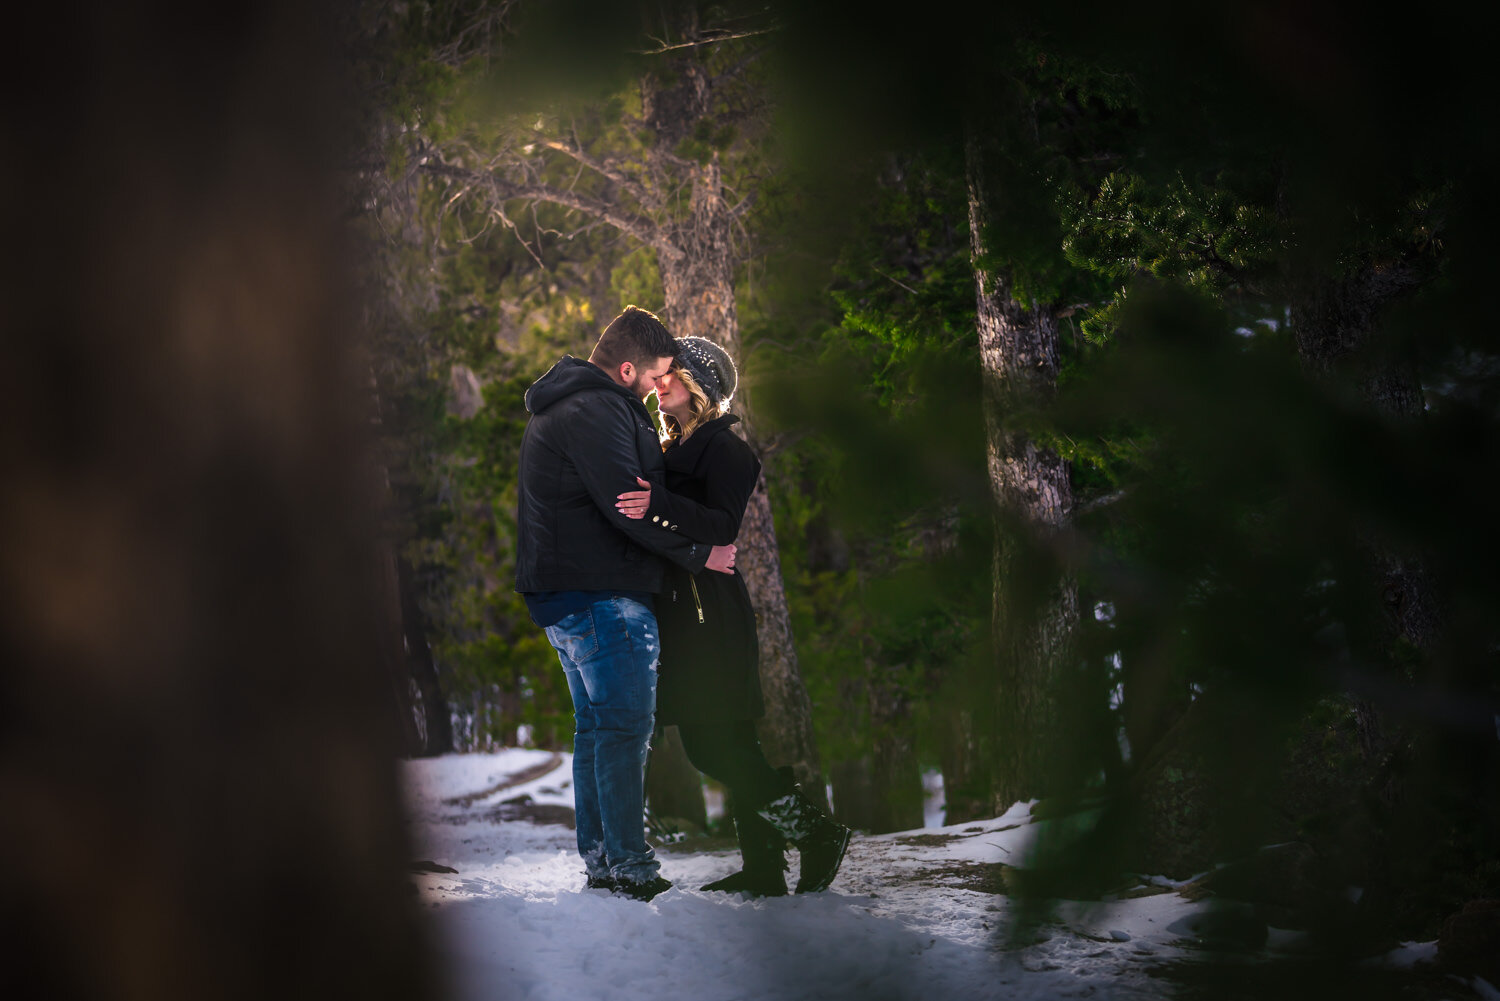  Snowy Estes Park Colorado engagement photos taken at Lily Lake in Rocky Mountain National. Photographed by JMGant Photography. 